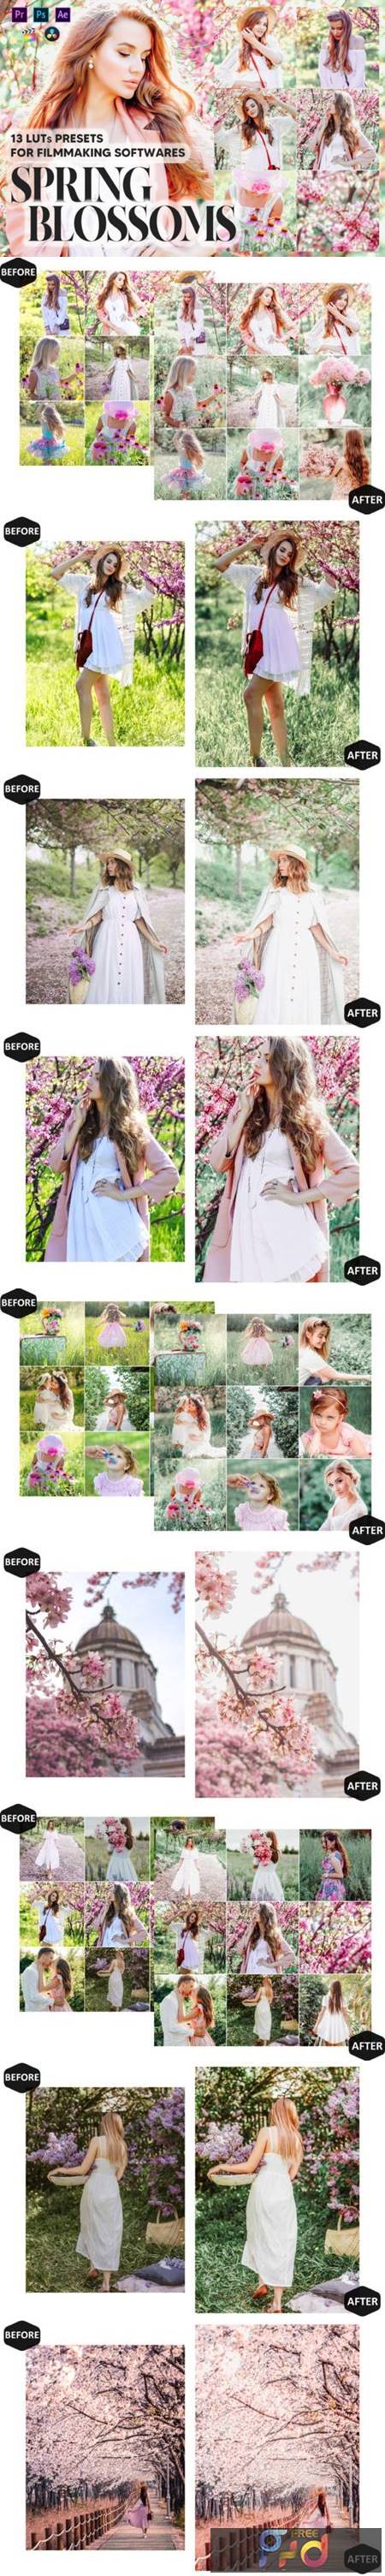 13 Spring Blossoms Video LUTs Presets 23551825 1